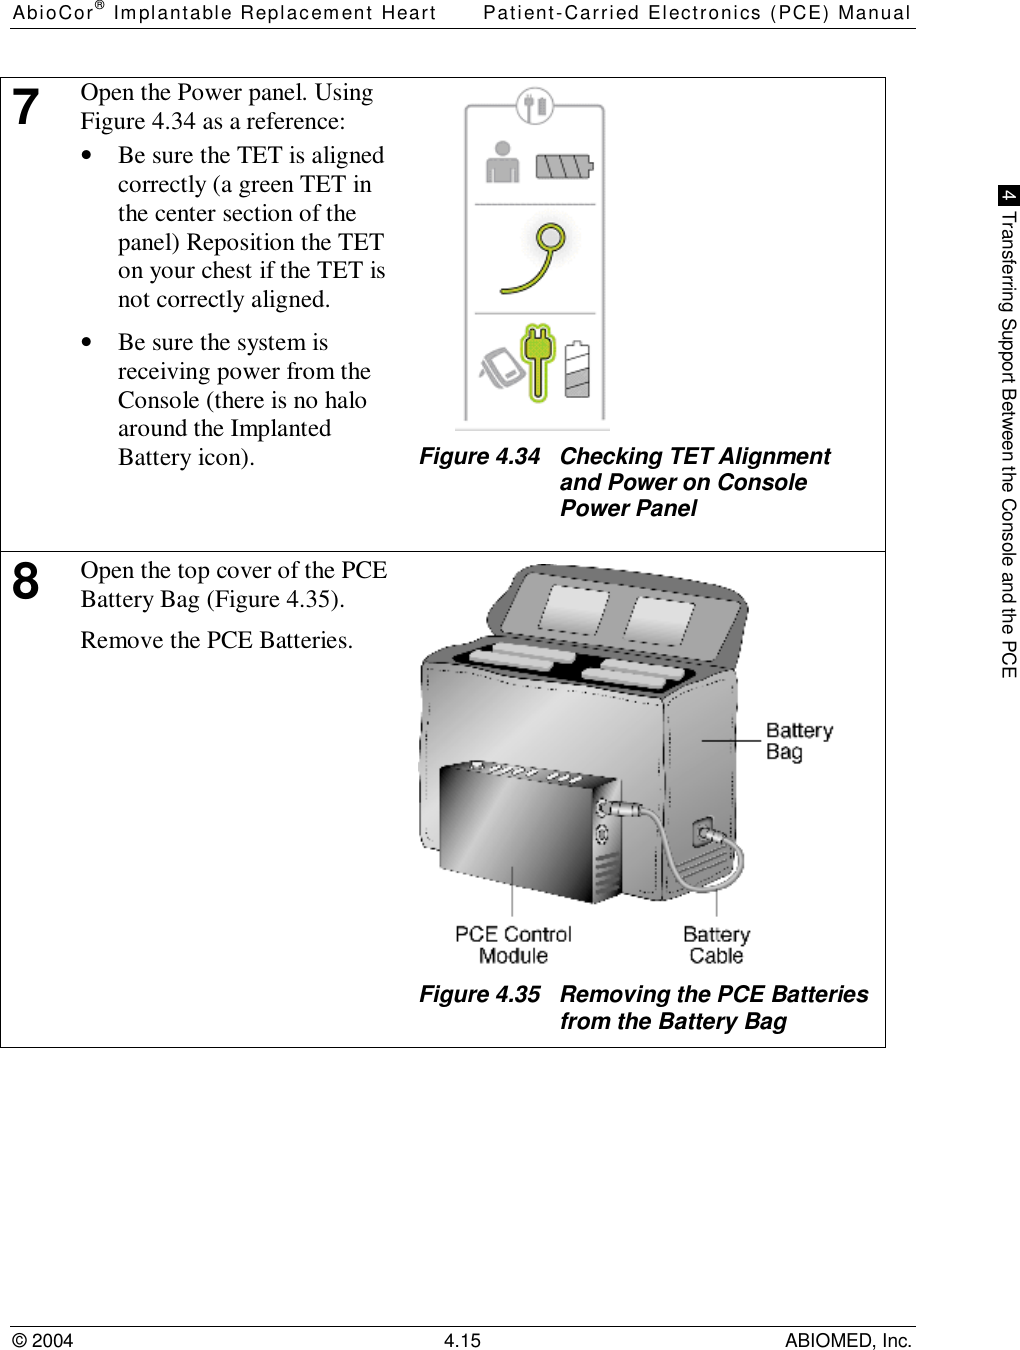 AbioCor® Implantable Replacement Heart Patient-Carried Electronics (PCE) Manual© 2004 4.15 ABIOMED, Inc. 4  Transferring Support Between the Console and the PCE7Open the Power panel. UsingFigure 4.34 as a reference:• Be sure the TET is alignedcorrectly (a green TET inthe center section of thepanel) Reposition the TETon your chest if the TET isnot correctly aligned.• Be sure the system isreceiving power from theConsole (there is no haloaround the ImplantedBattery icon). Figure 4.34   Checking TET Alignmentand Power on ConsolePower Panel8Open the top cover of the PCEBattery Bag (Figure 4.35).Remove the PCE Batteries.Figure 4.35   Removing the PCE Batteriesfrom the Battery Bag